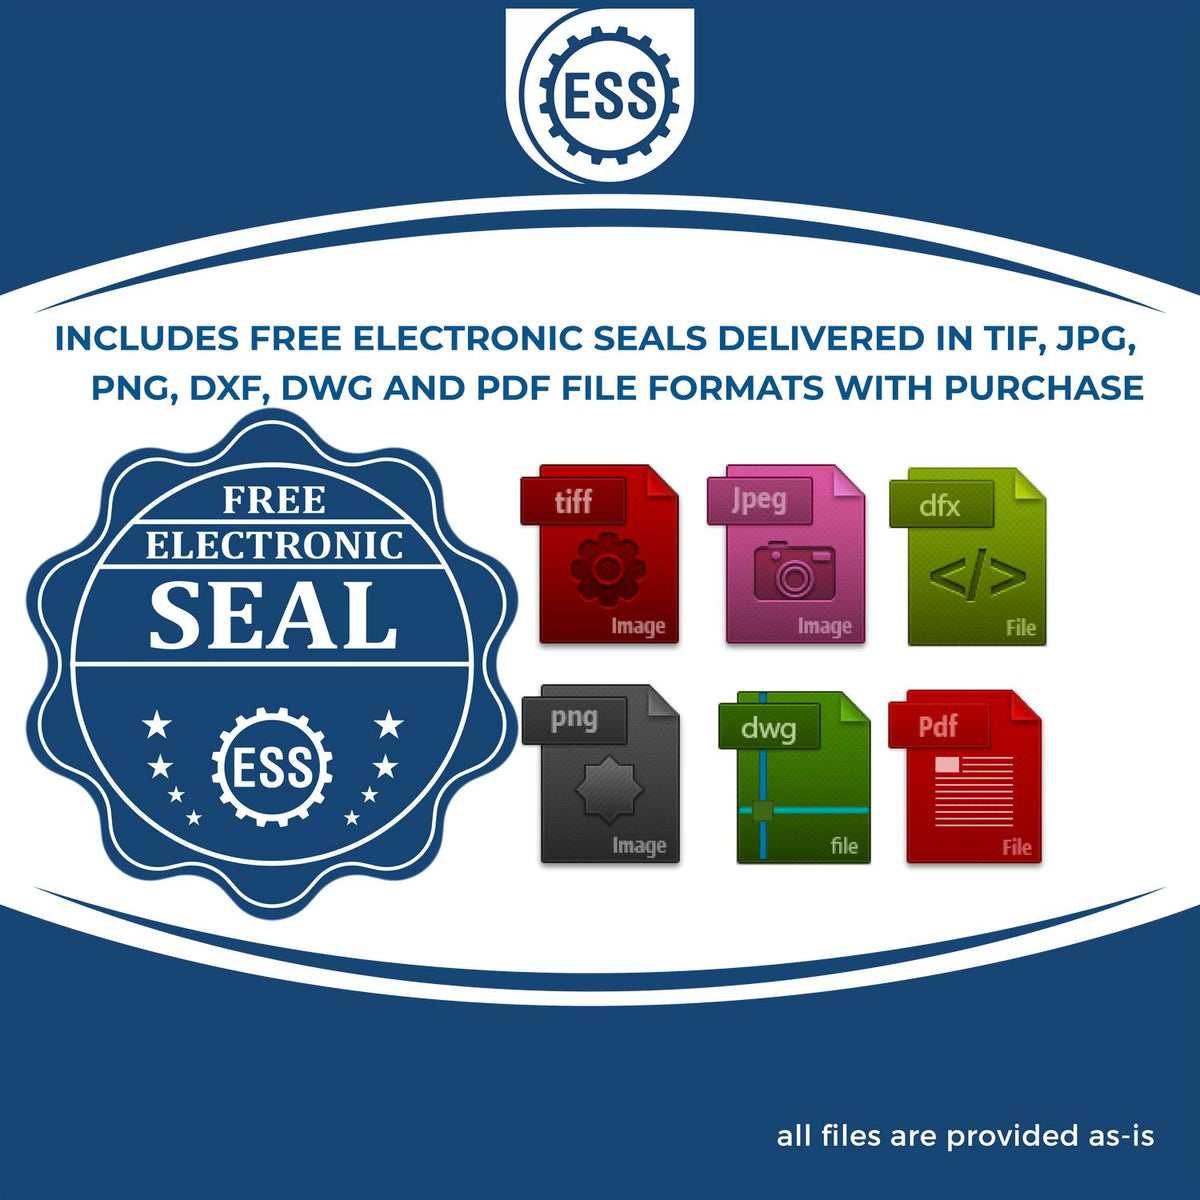 An infographic for the free electronic seal for the Heavy-Duty Colorado Rectangular Notary Stamp illustrating the different file type icons such as DXF, DWG, TIF, JPG and PNG.